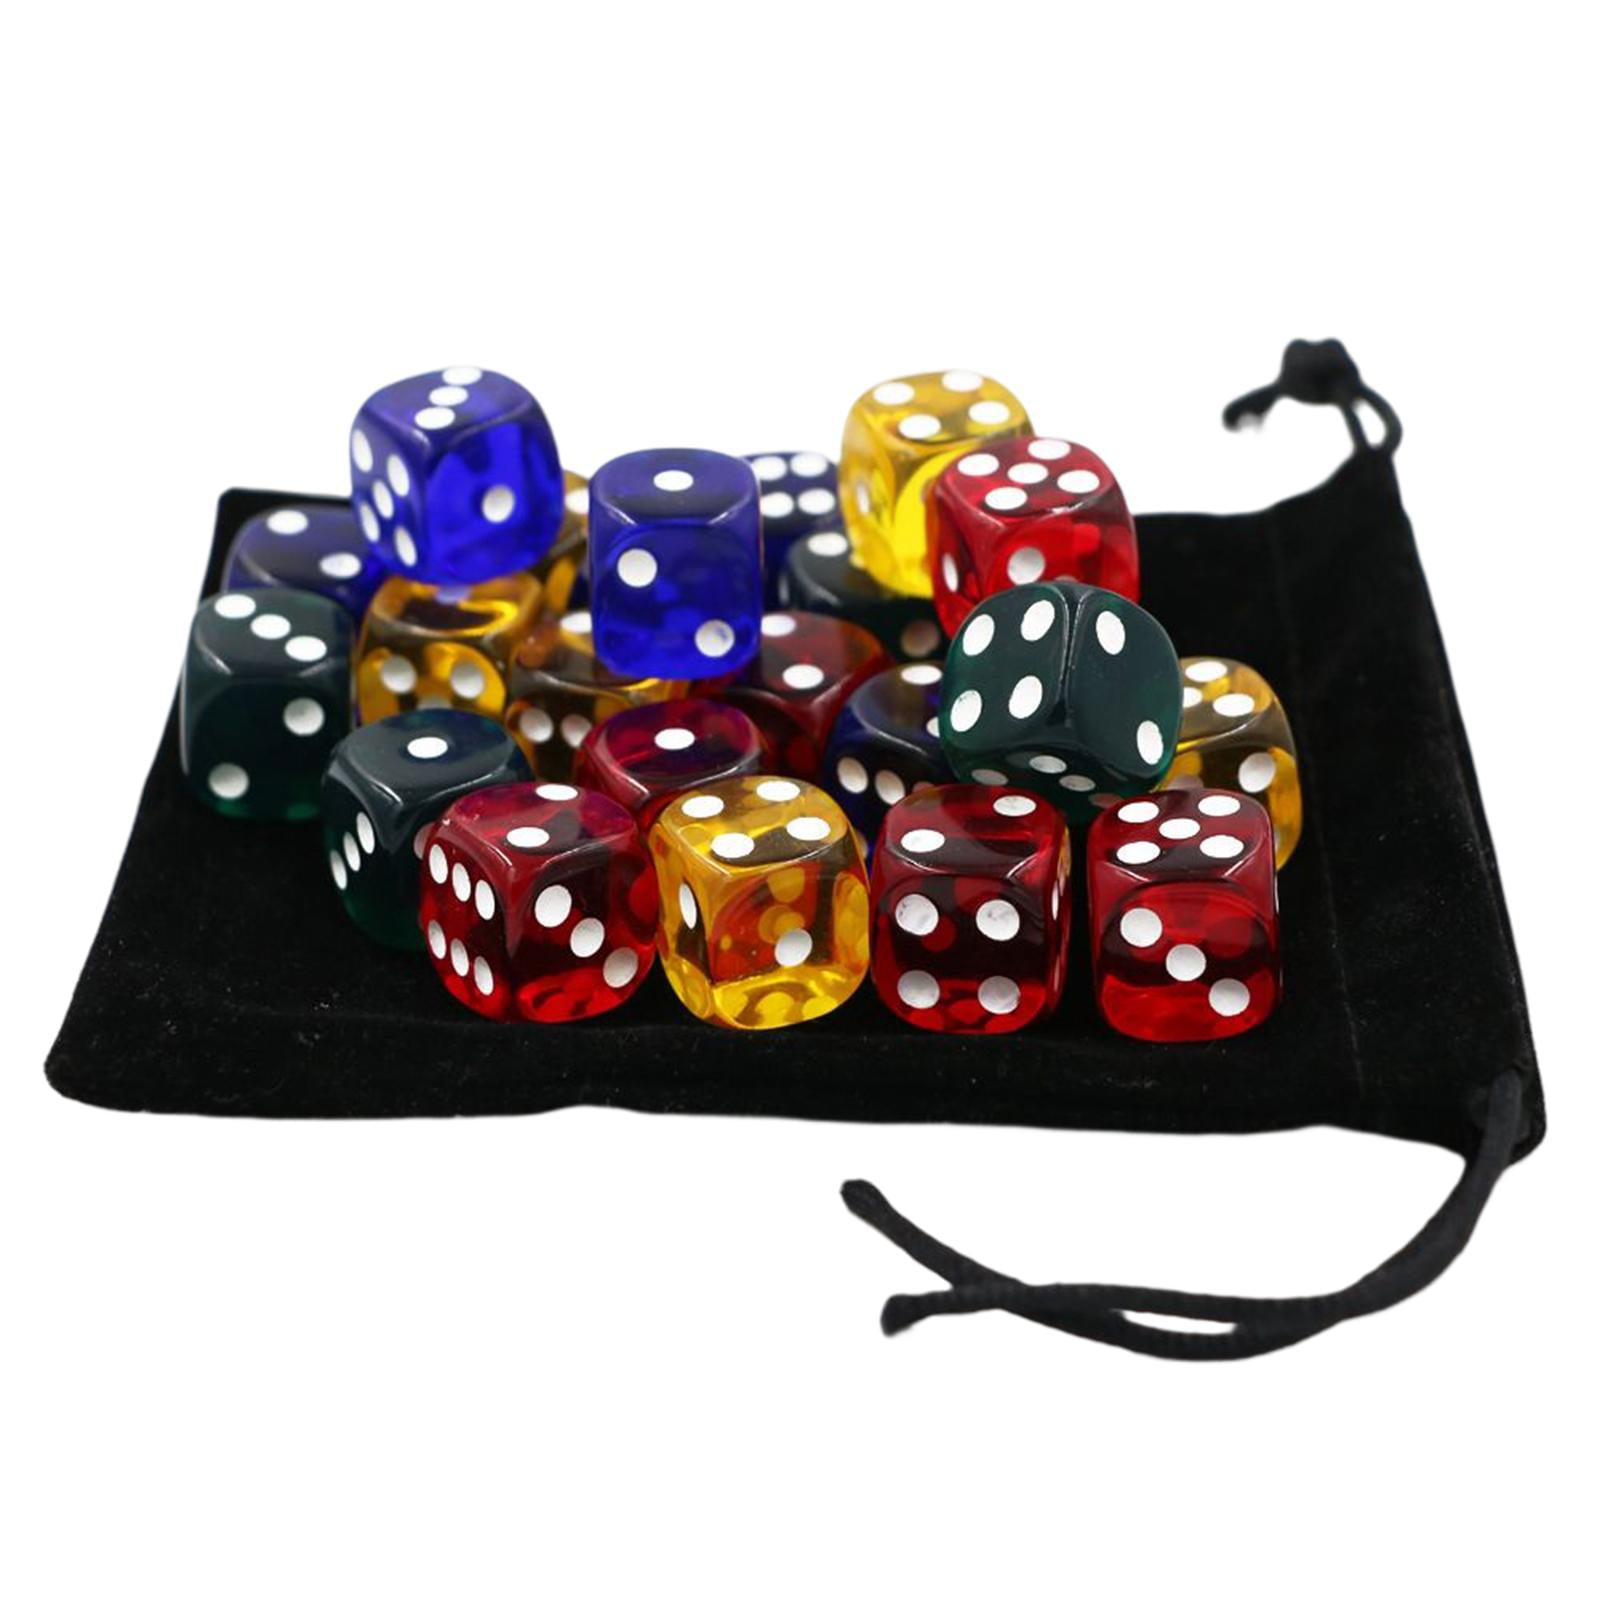 Octagon Dice Plate Wood and Felt with 5 dice Goki Fun Childrens Game Traditional 